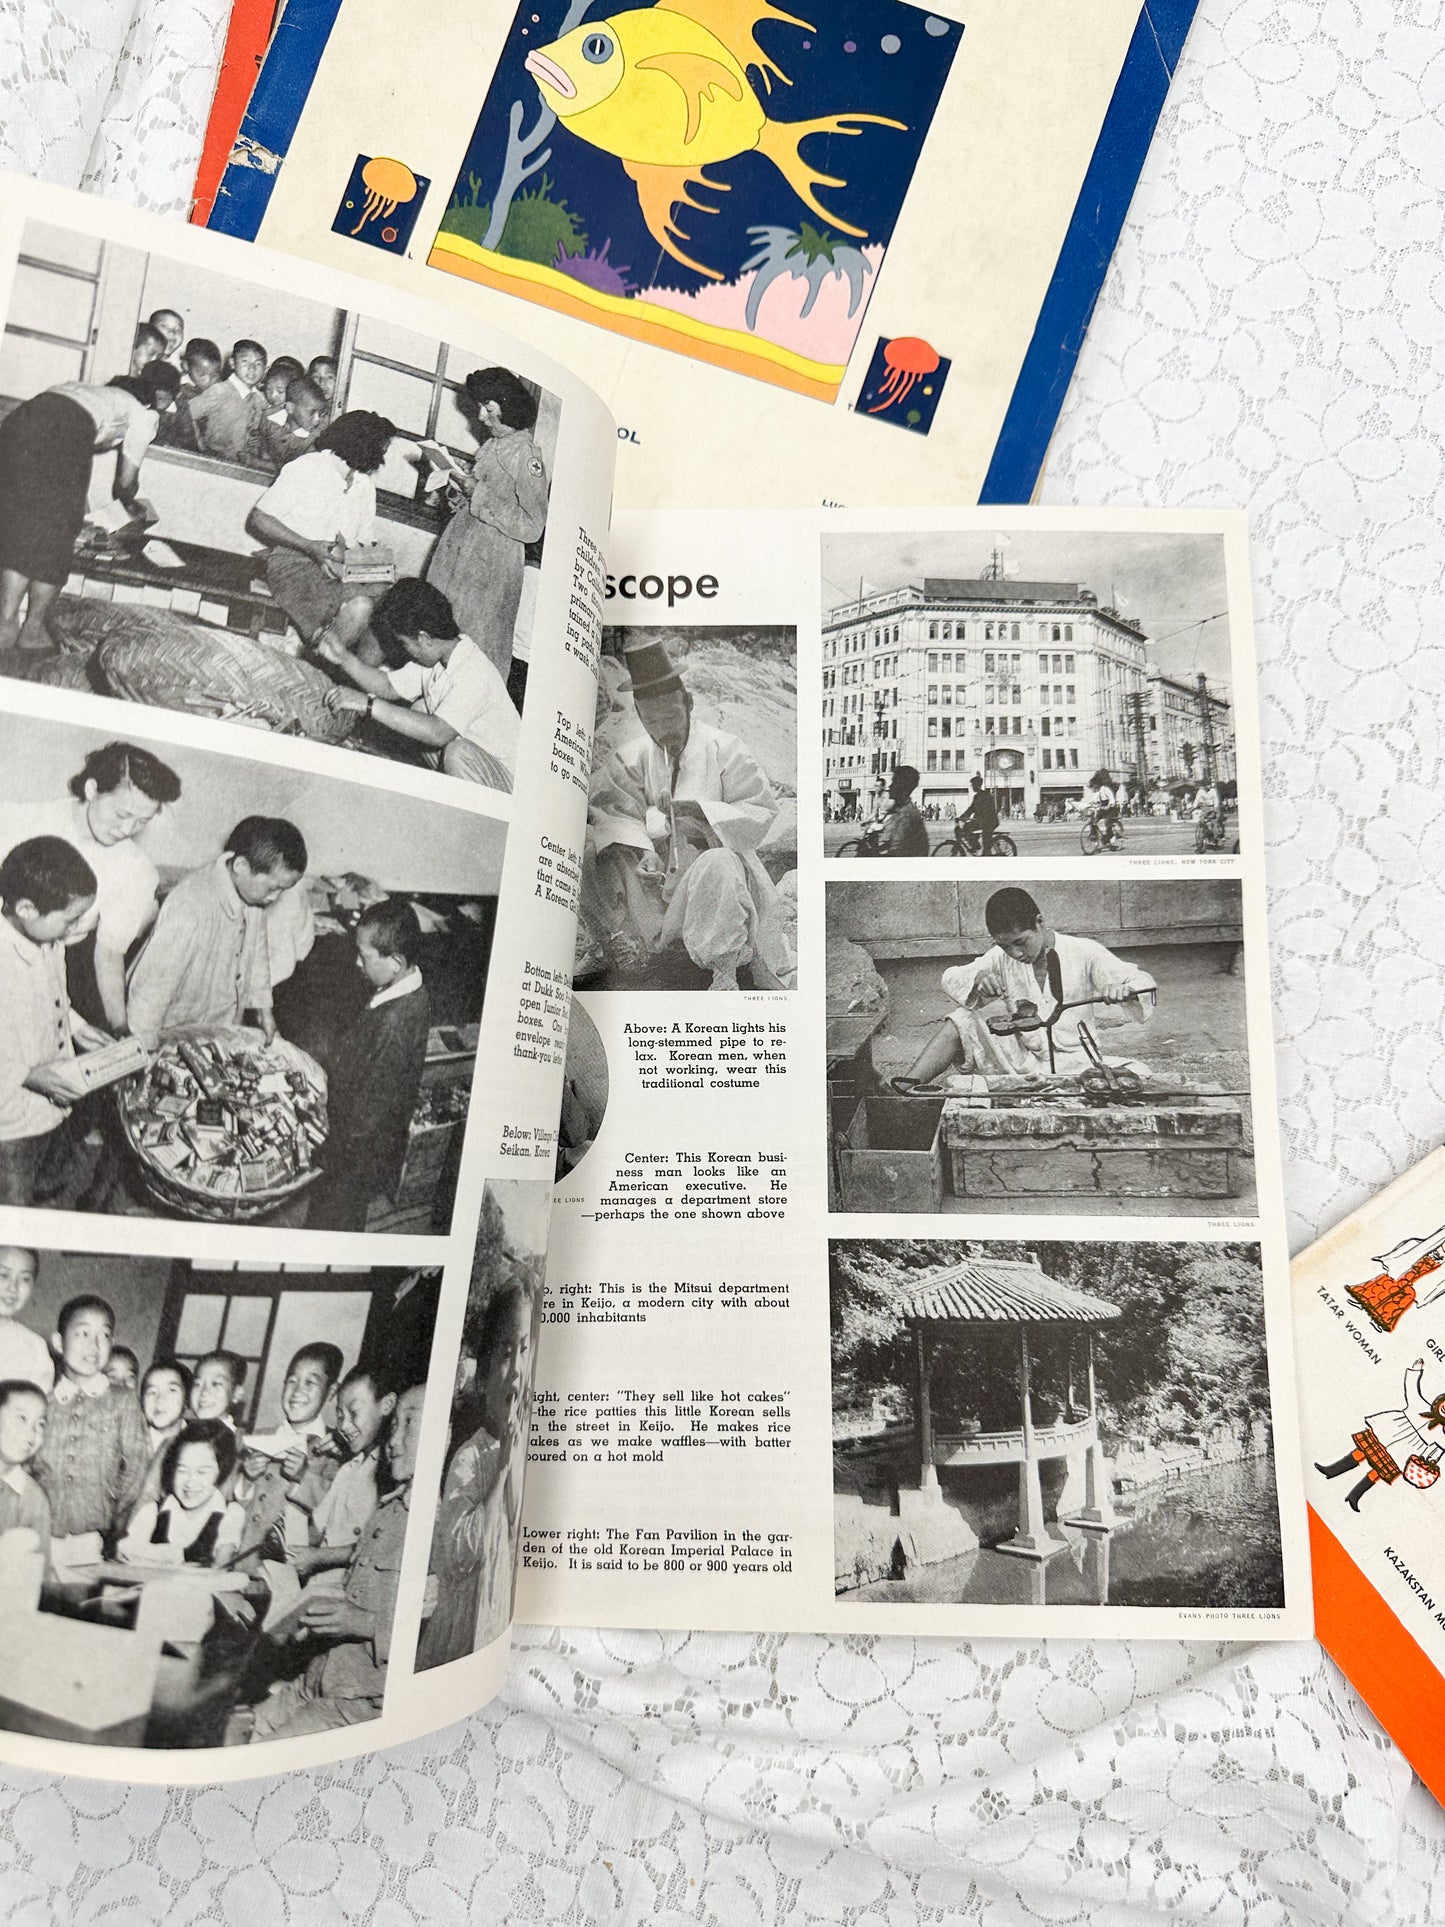 Collection of Vintage Education Magazines